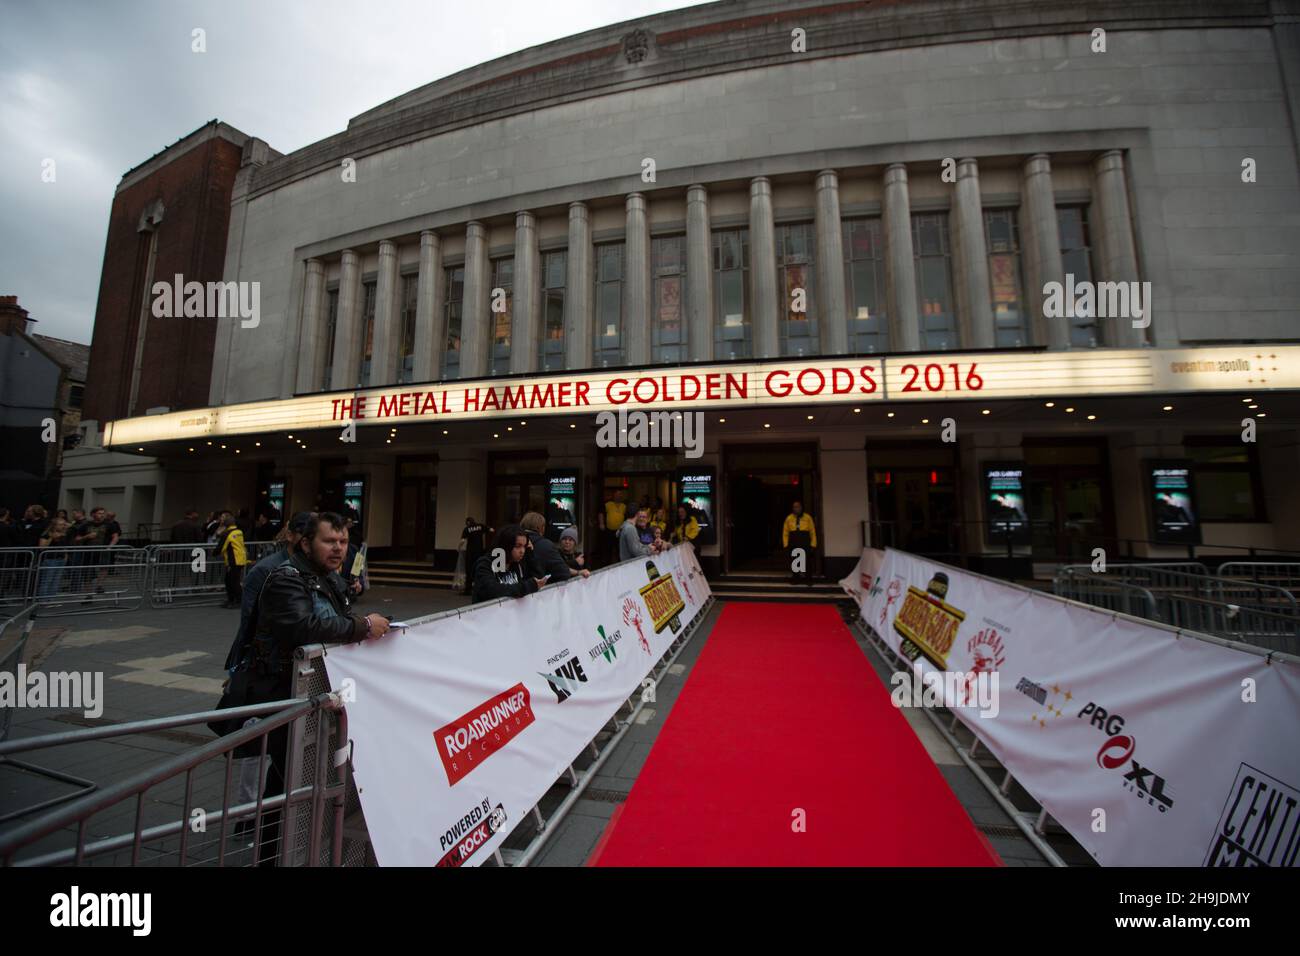 A view of the Hammersmith Eventim (formerly the Apollo and the Odeon) in London before the 2016 Metal Hammer Golden Gods awards Stock Photo